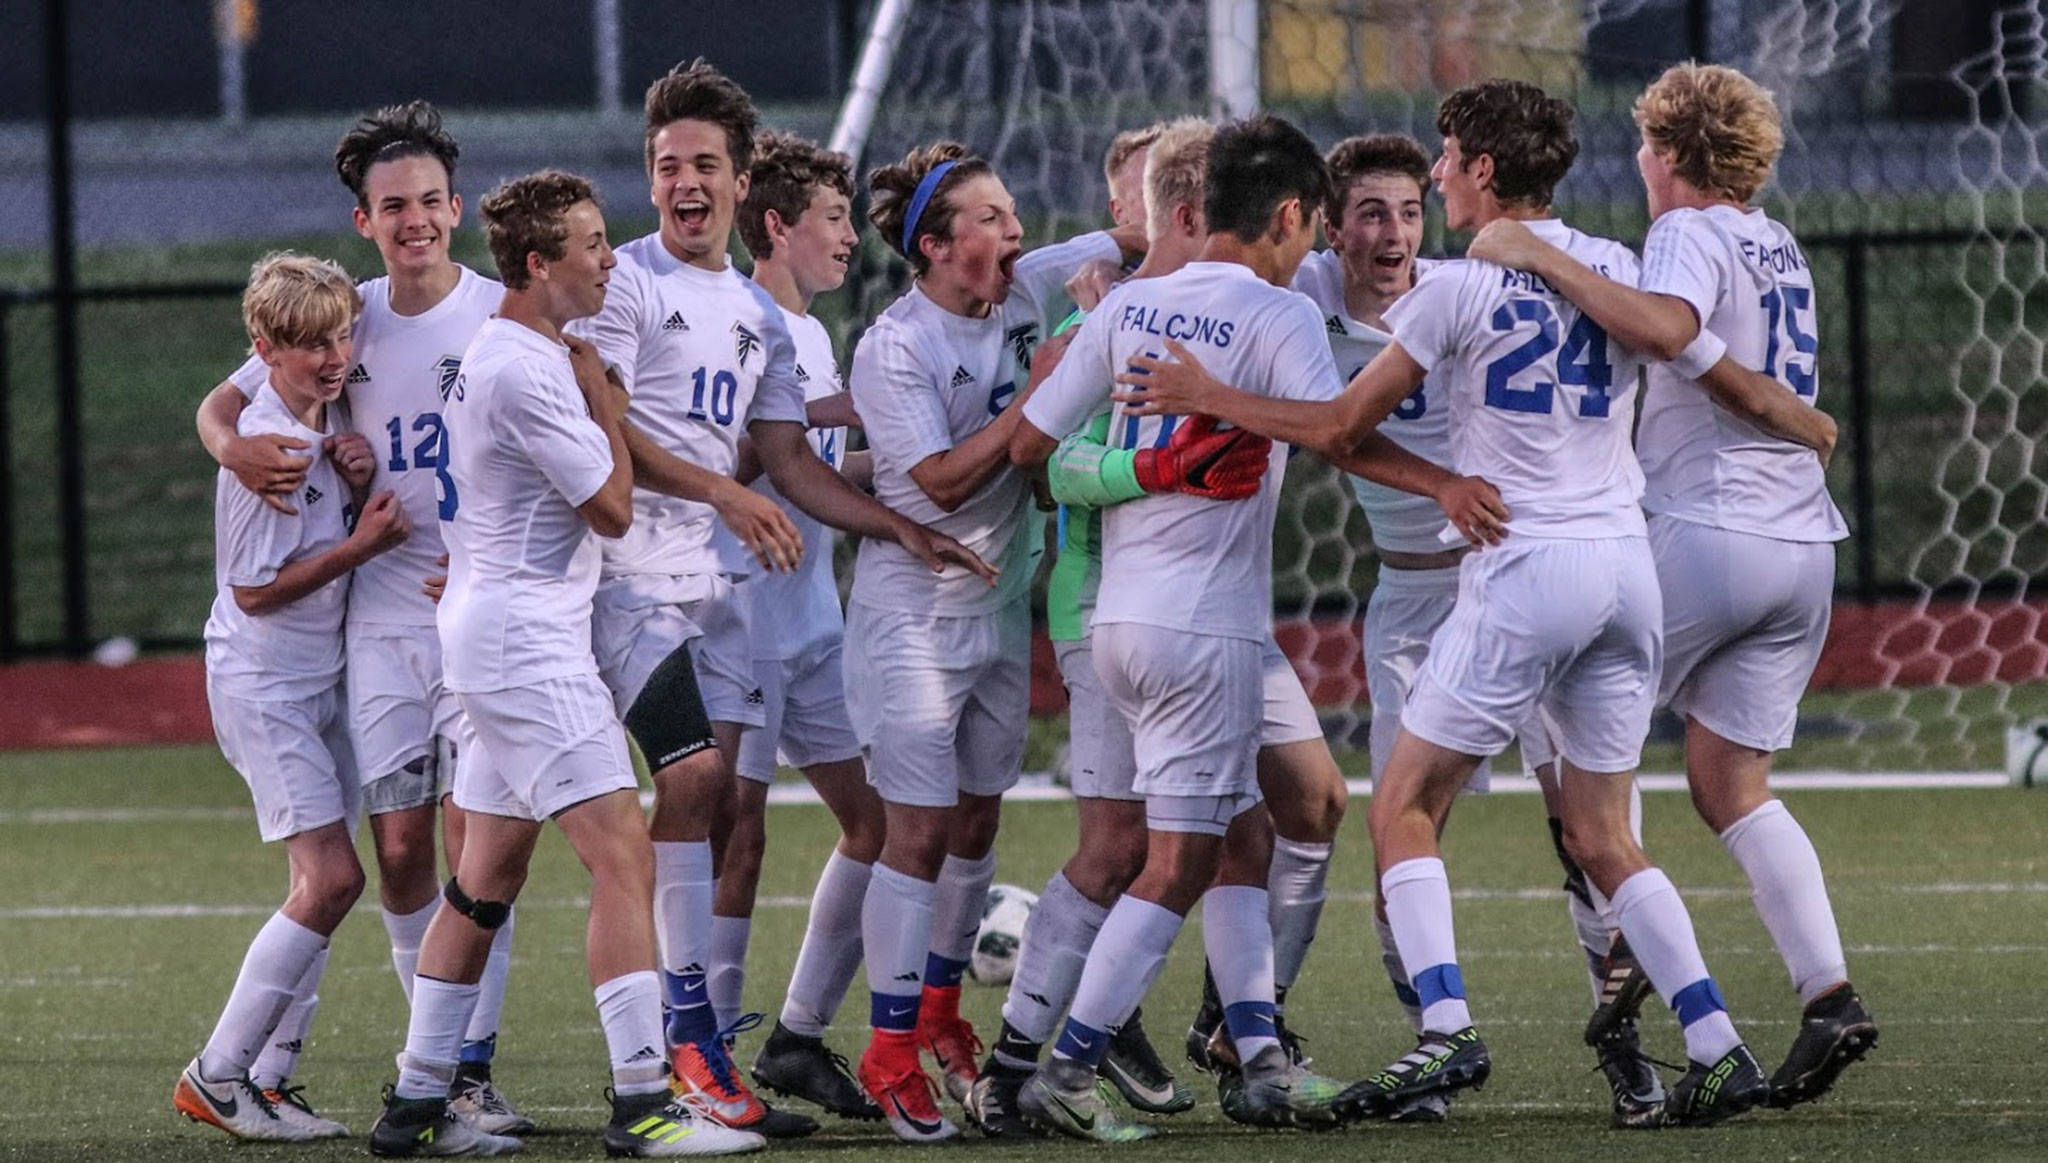 South Whidbey celebrates its win over Klahowya in the state tournament Tuesday.(Photo by Matt Simms)